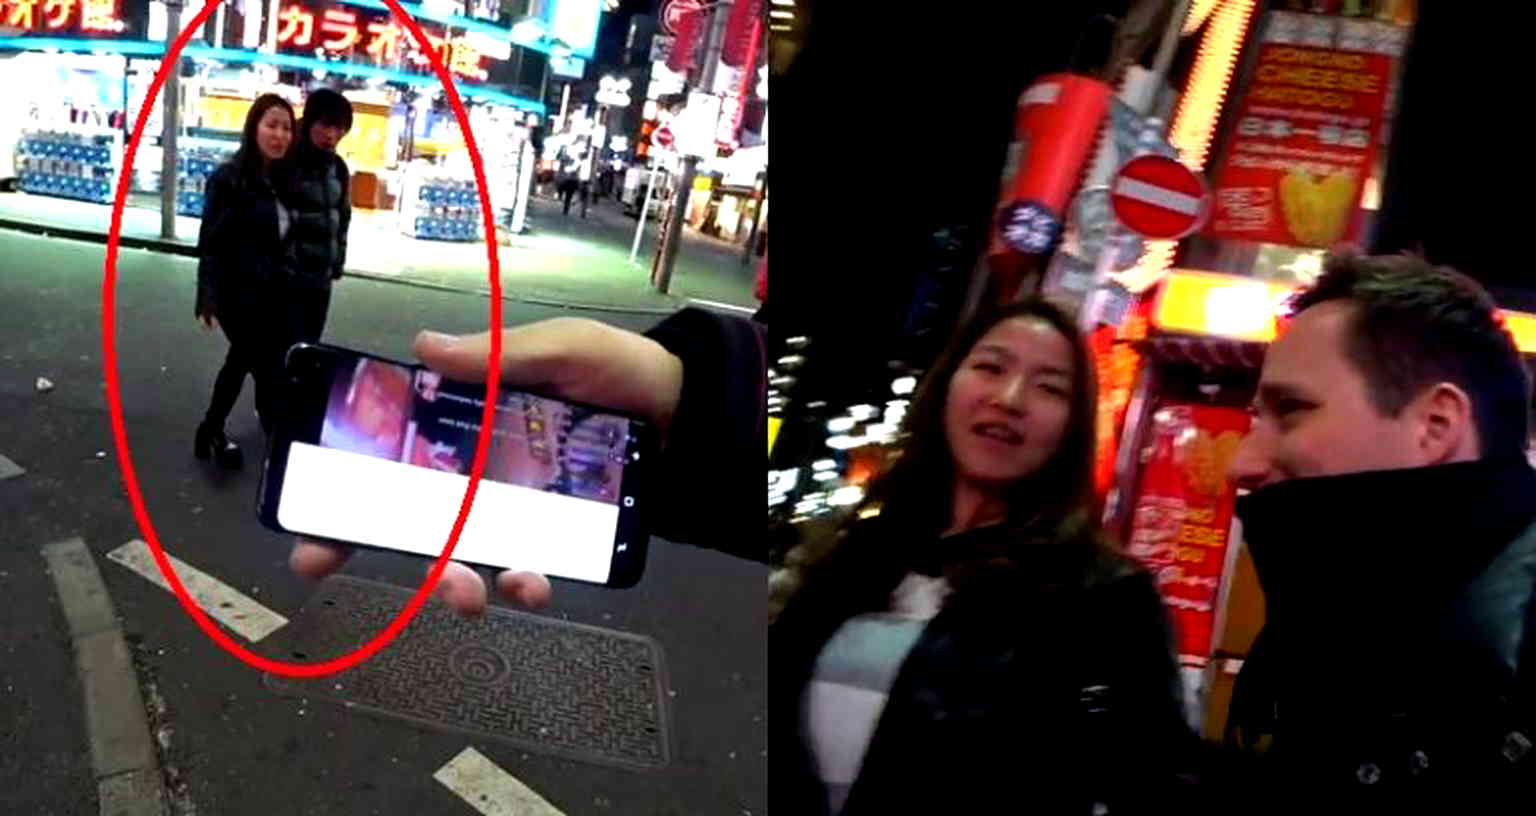 Australian Twitch Streamer Saves Woman From Being Followed by Stranger in Tokyo